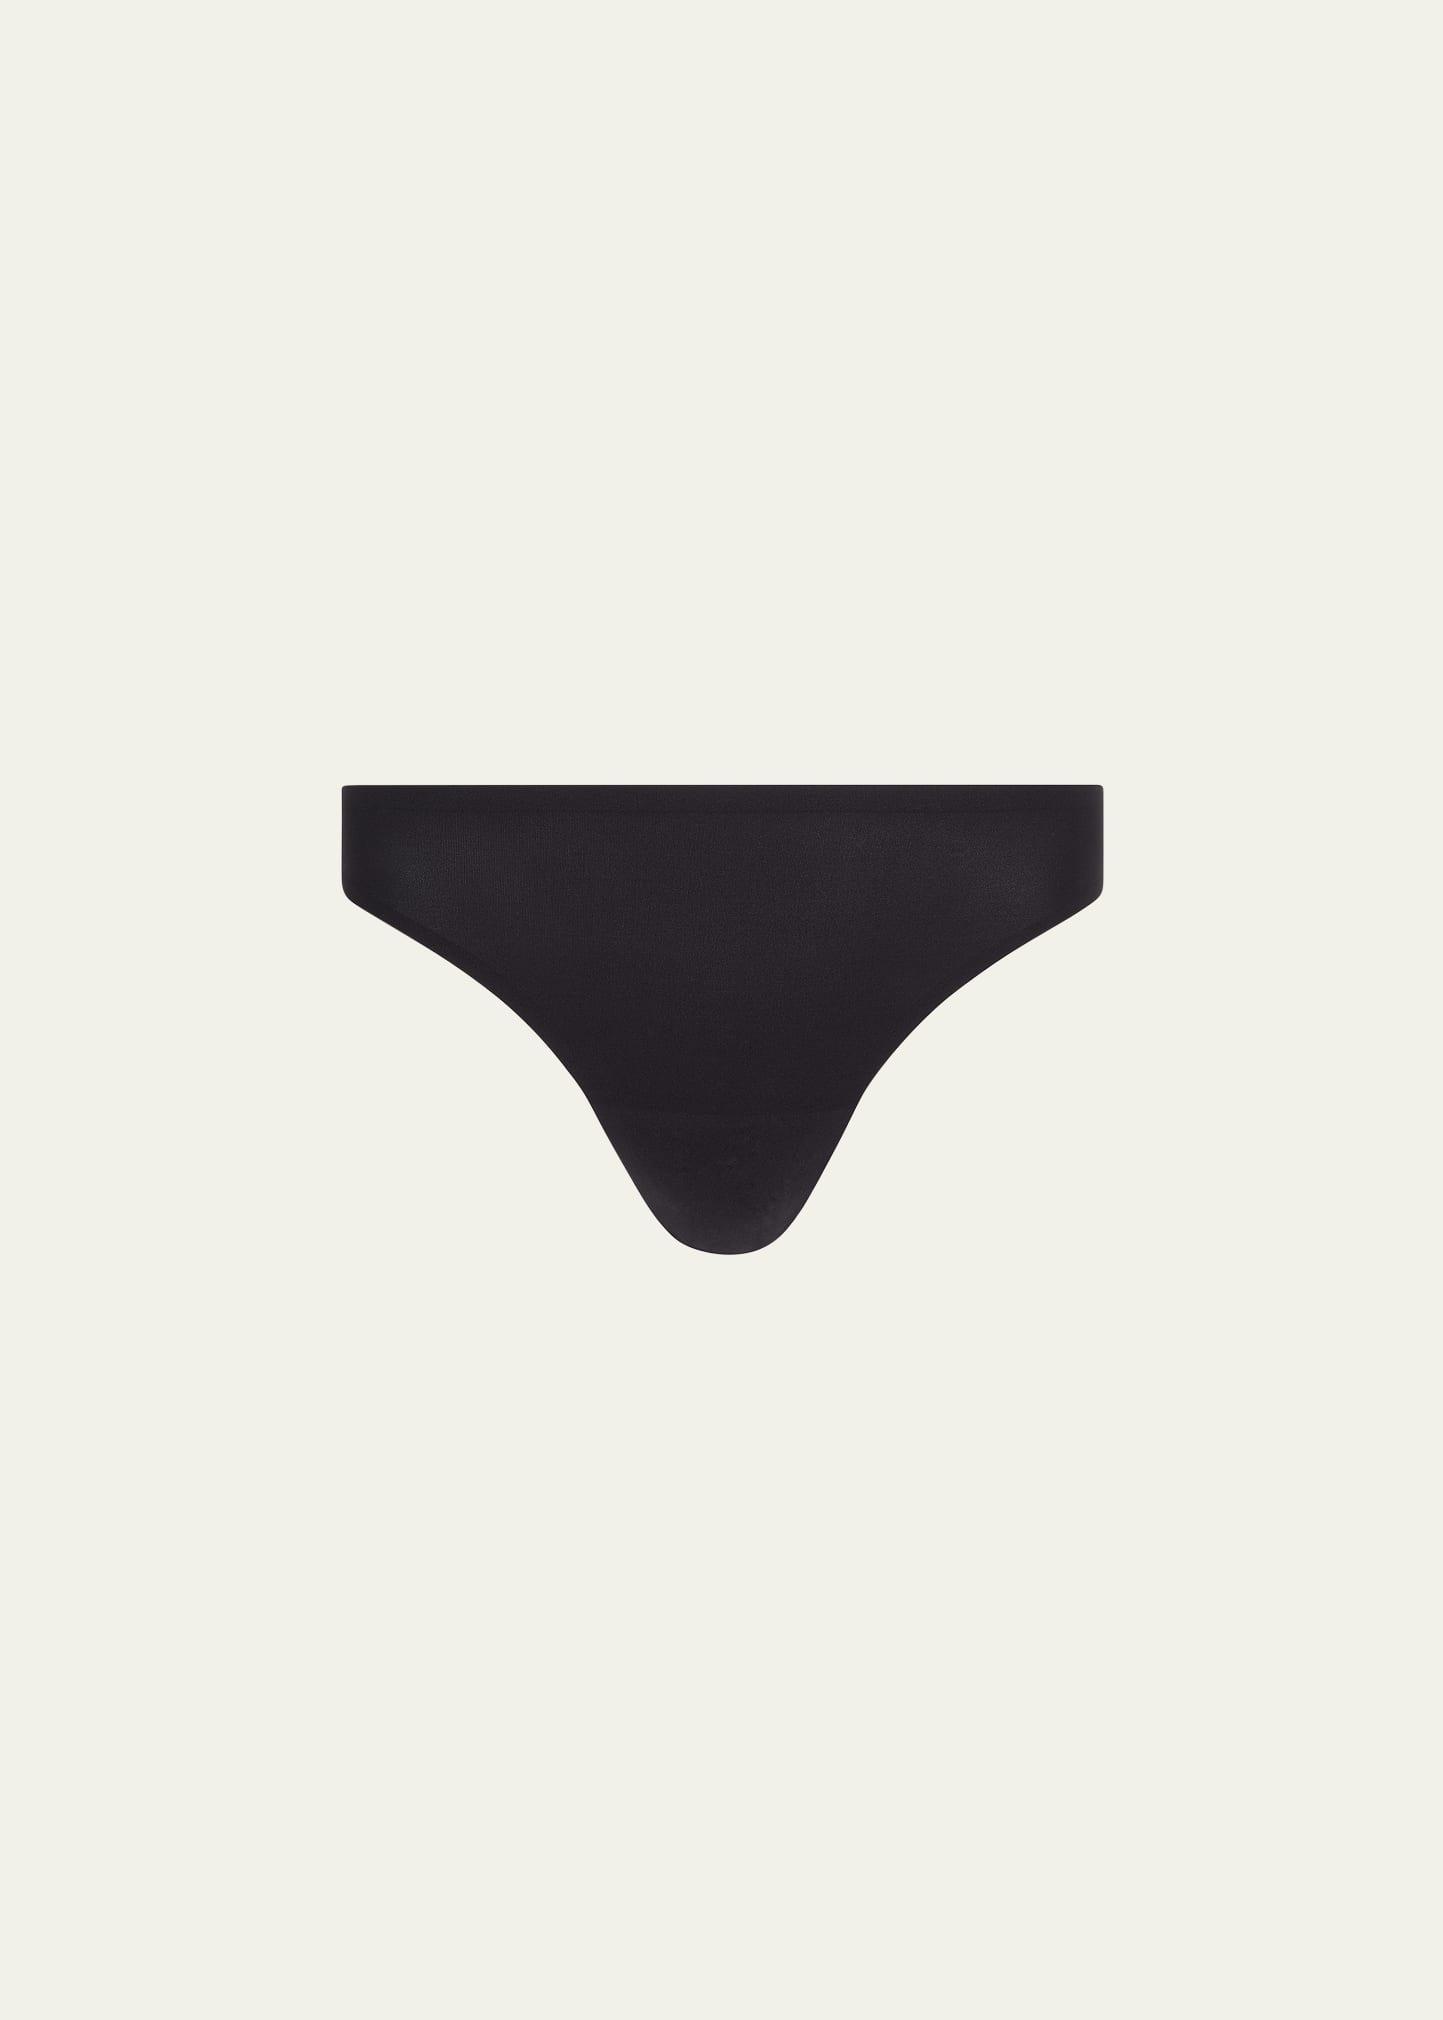 Hanro Micro Touch Briefs Product Image